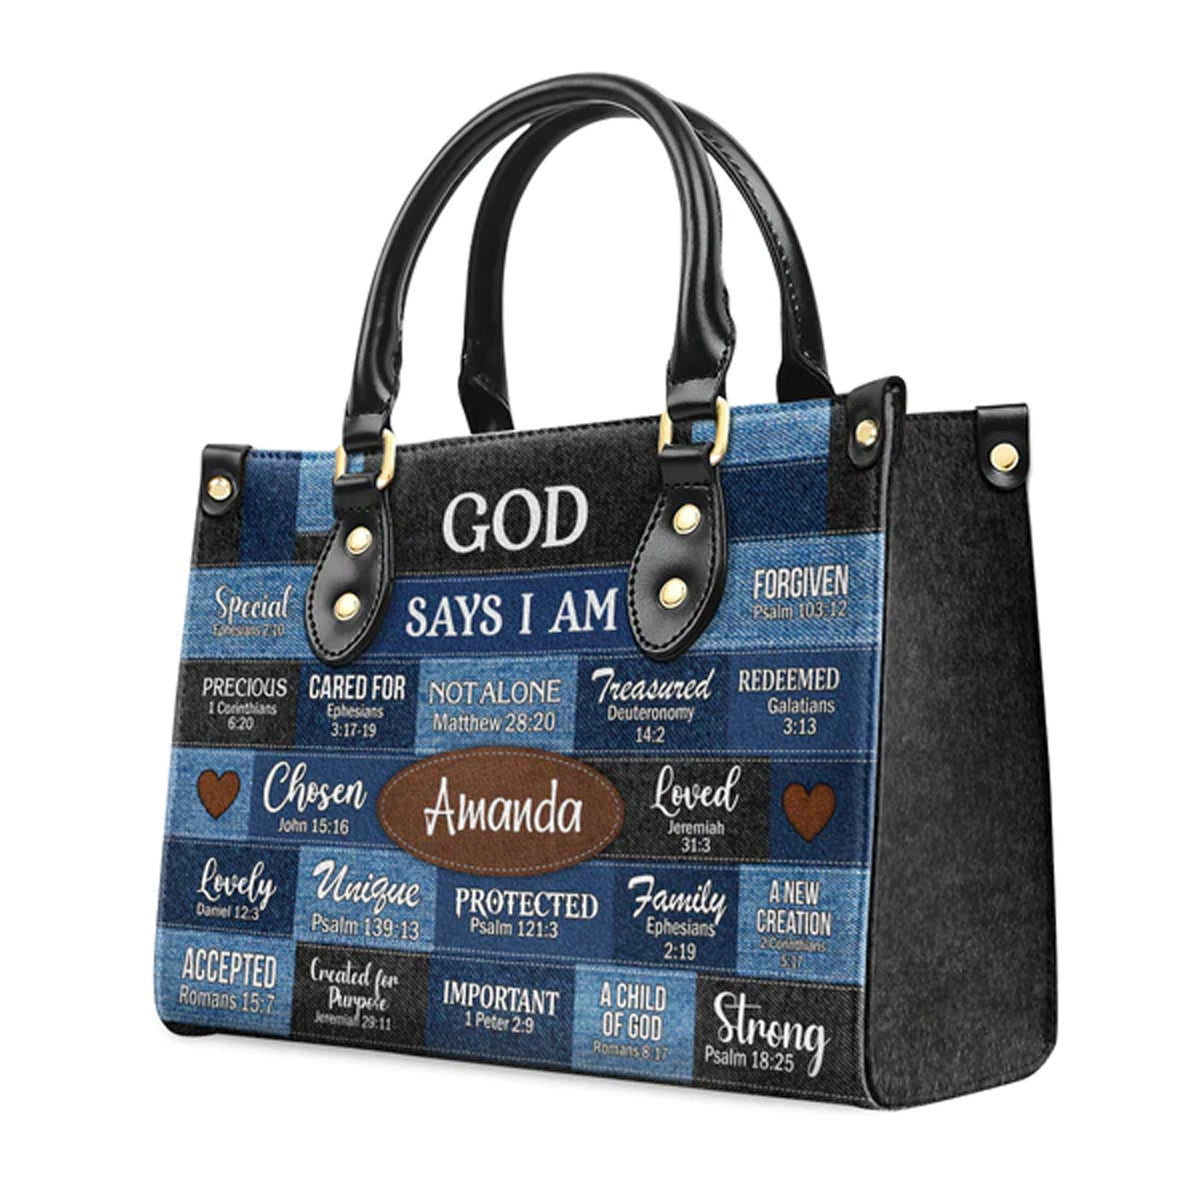 Christianartbag Handbags, God Says I Am Strong Leather Bags, Personalized Bags, Gifts for Women, Christmas Gift, CABLTB01300723. - Christian Art Bag